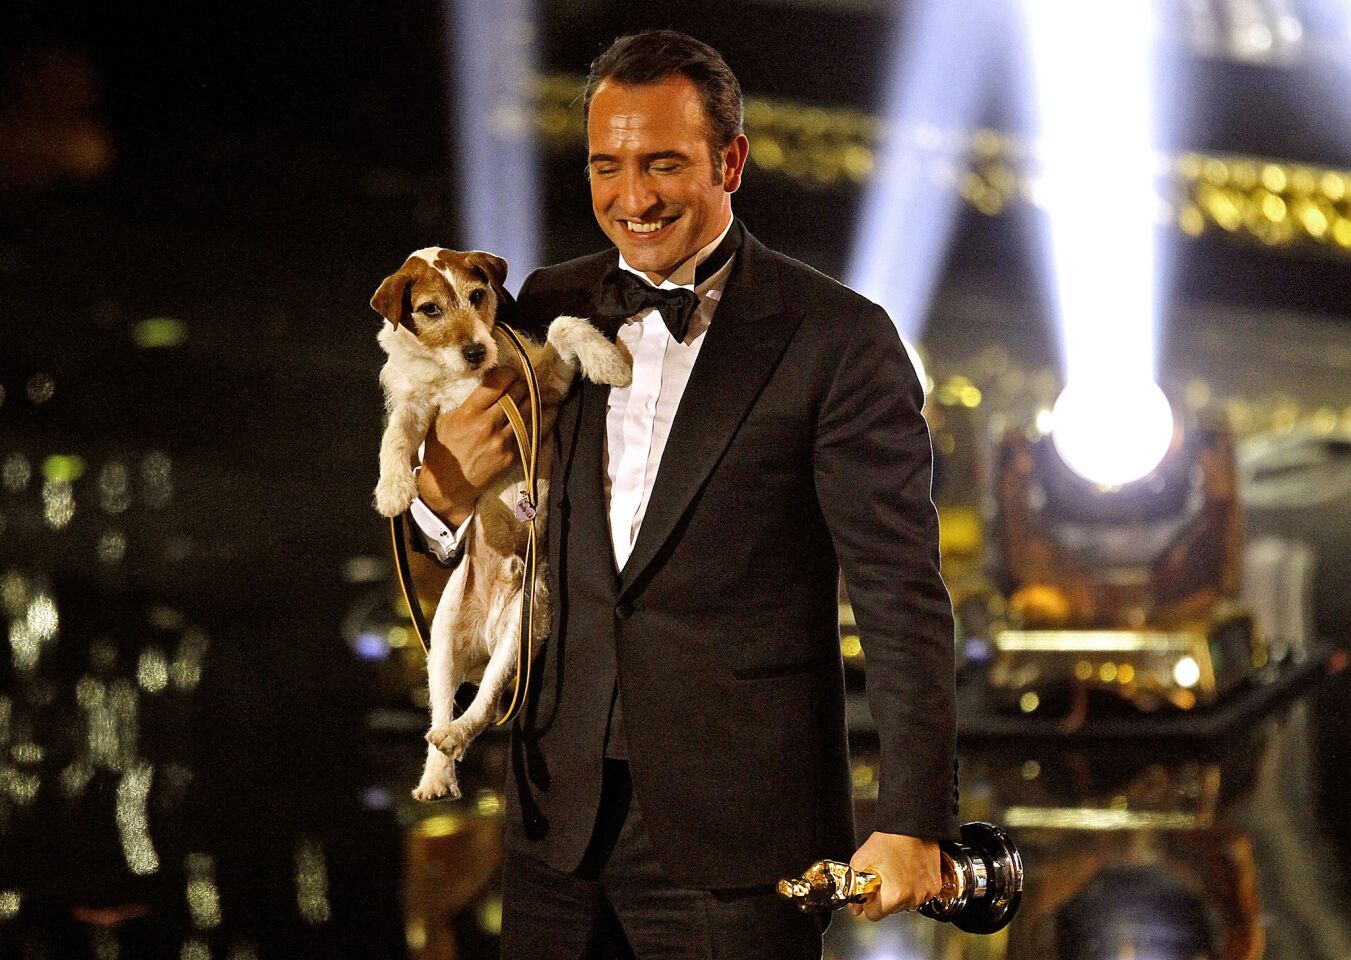 Jean Dujardin, after winning lead actor for "The Artist," walks off the stage with Uggie the dog at the 84th Academy Awards.